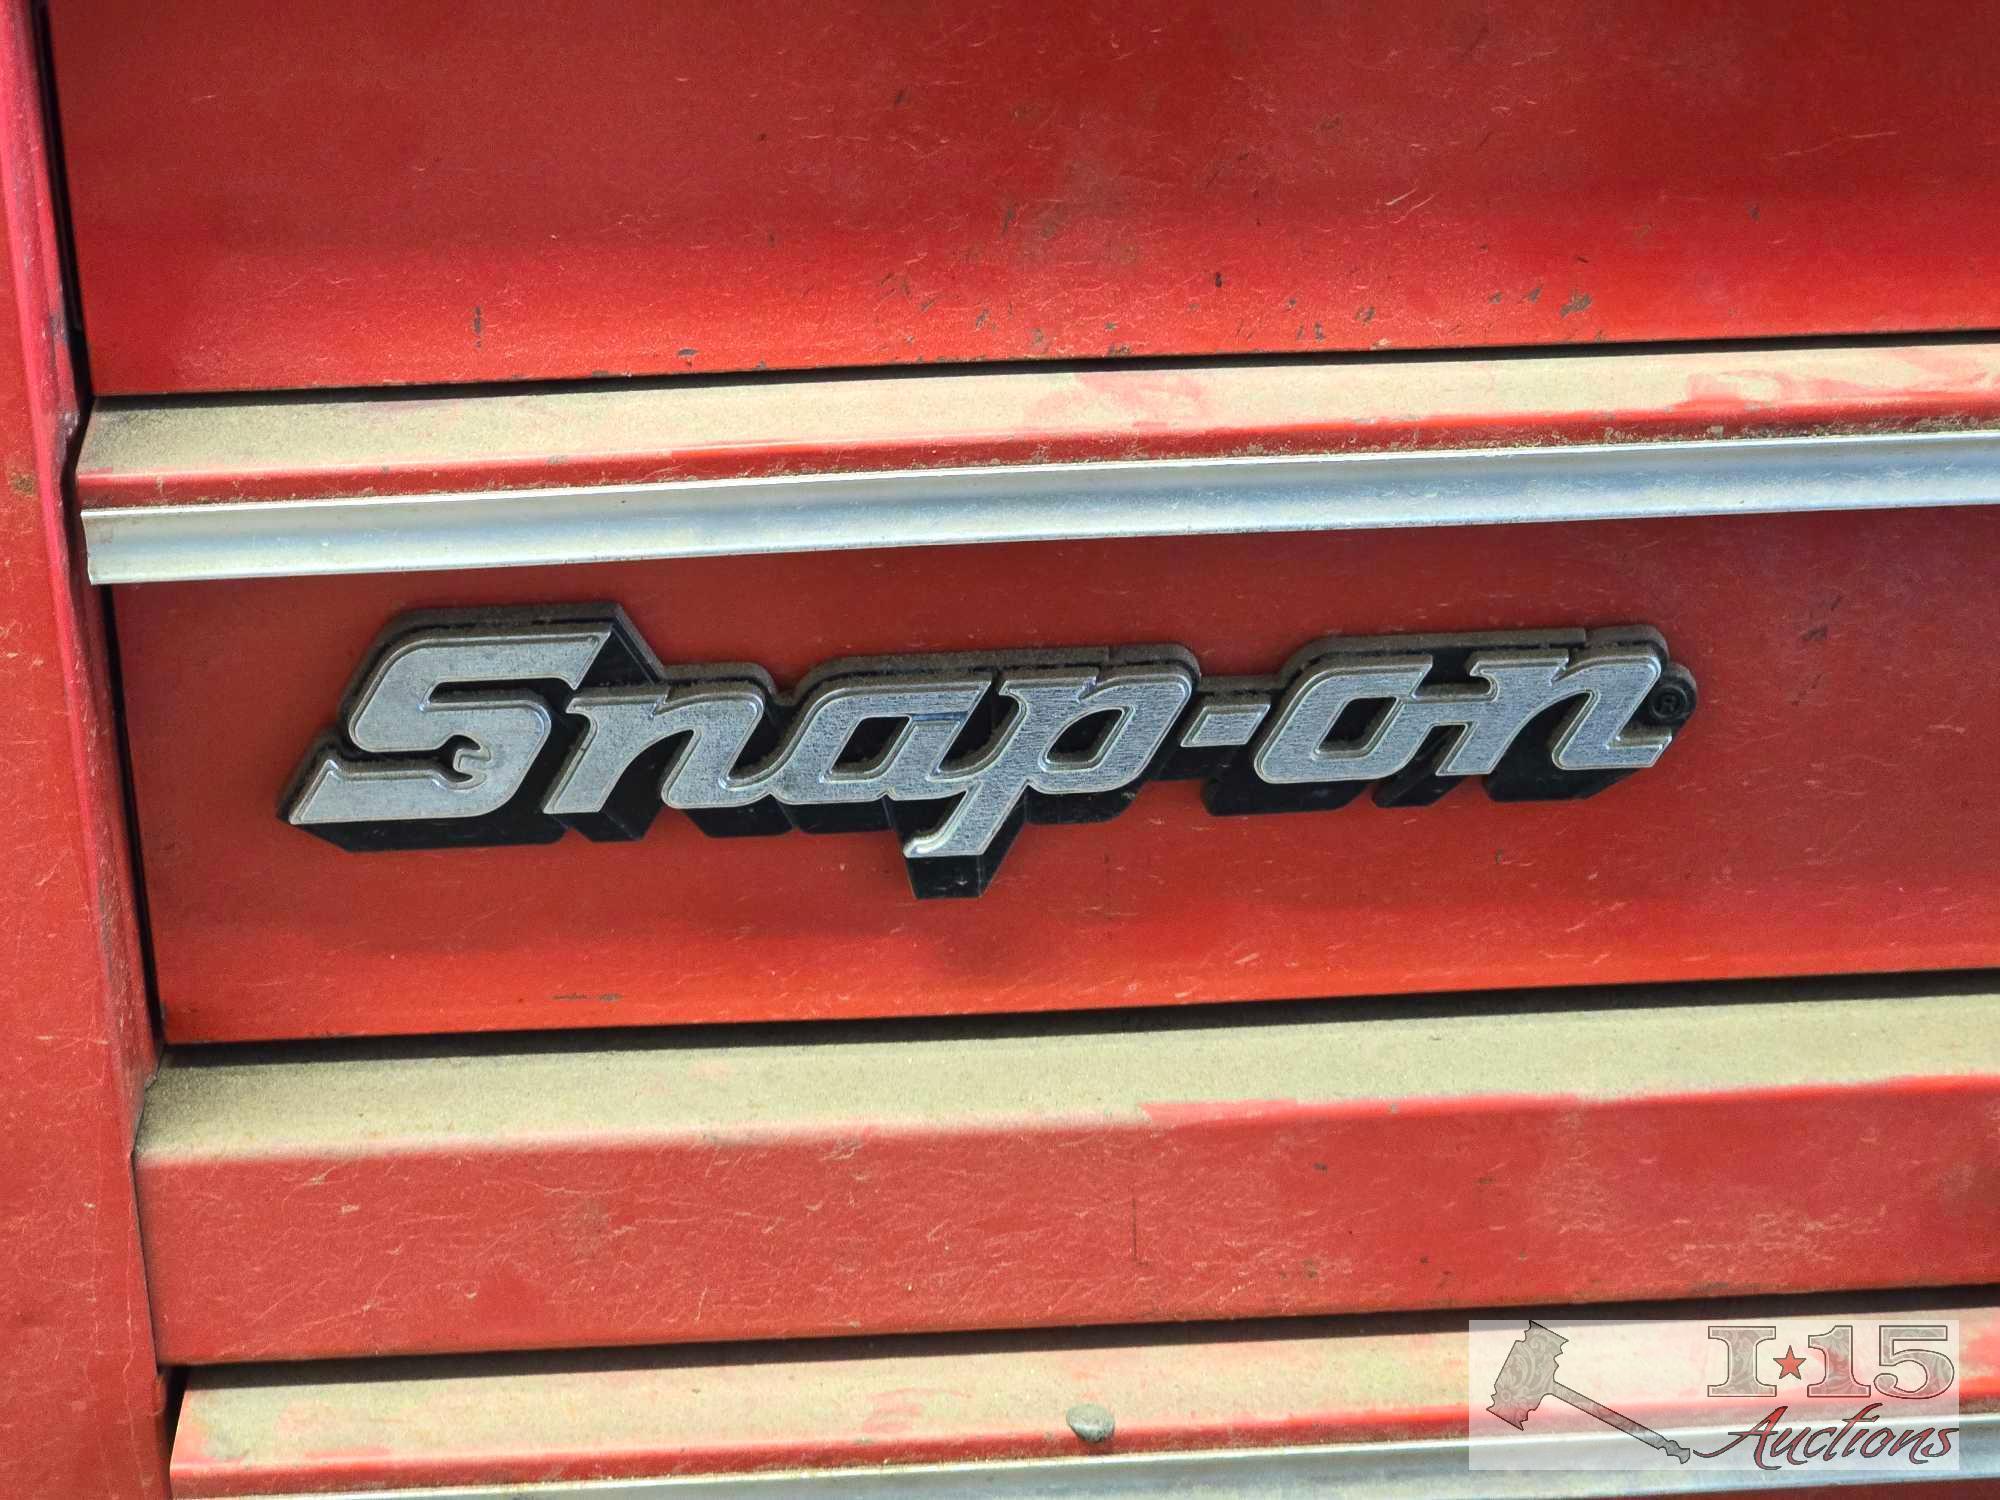 Snap-On Tool Box (7 Drawer), Some Tools